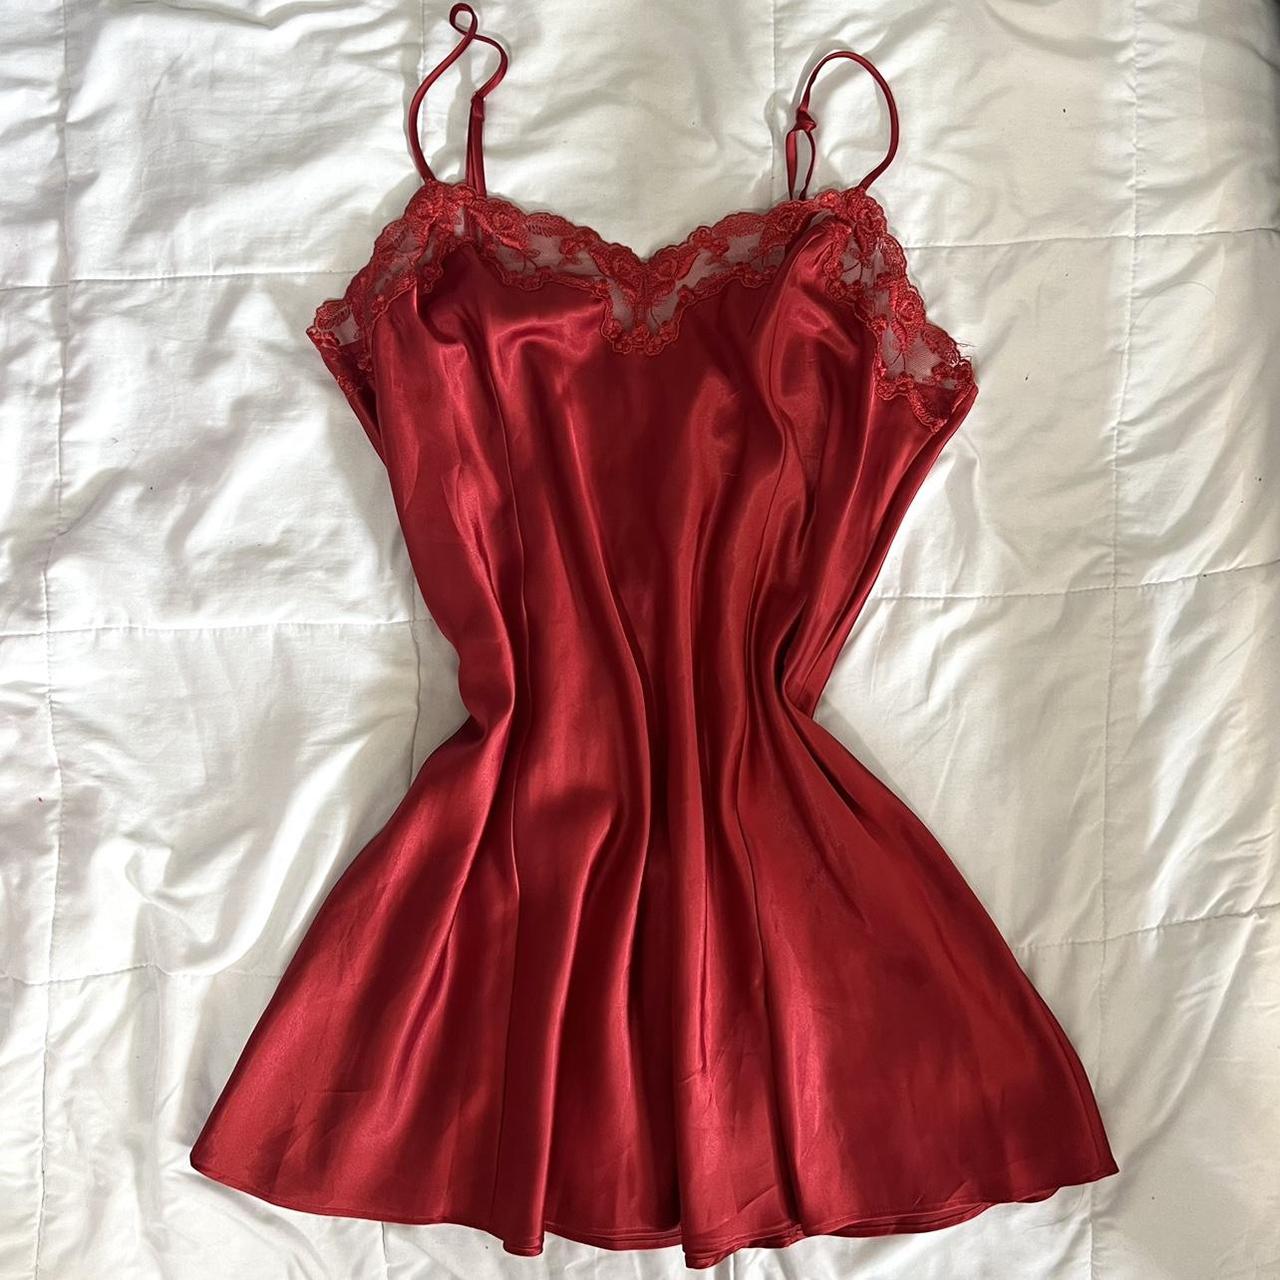 Buy Victoria's Secret Lipstick Red Satin Lace Slip Dress from the